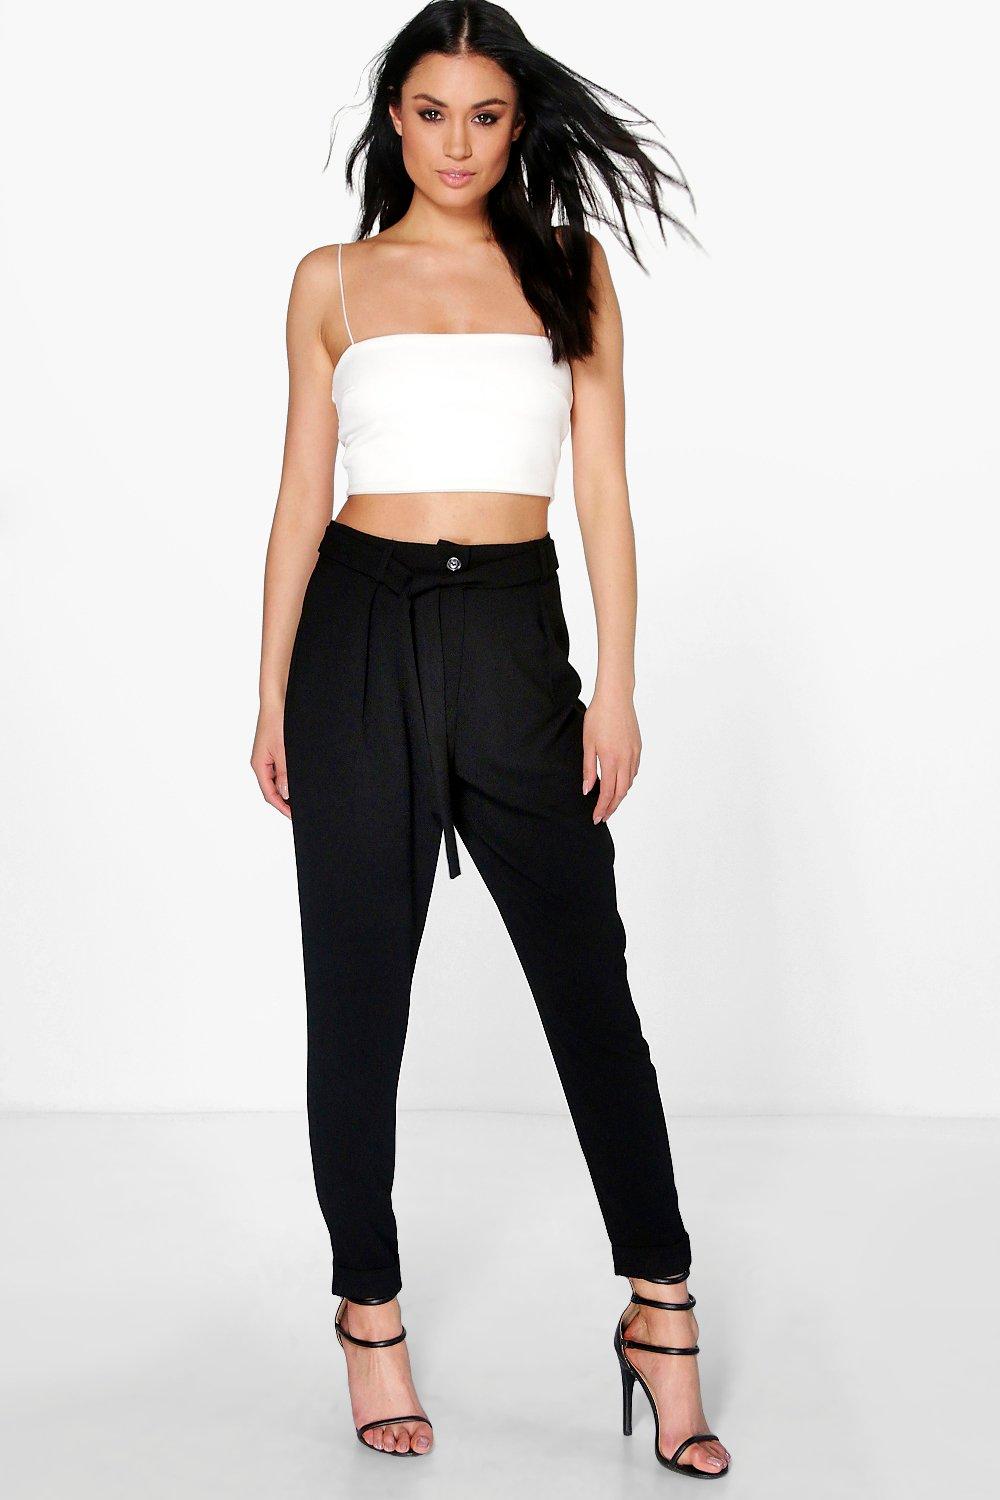 Rosa Tie Waist Tailored Slim Fit Trousers at boohoo.com